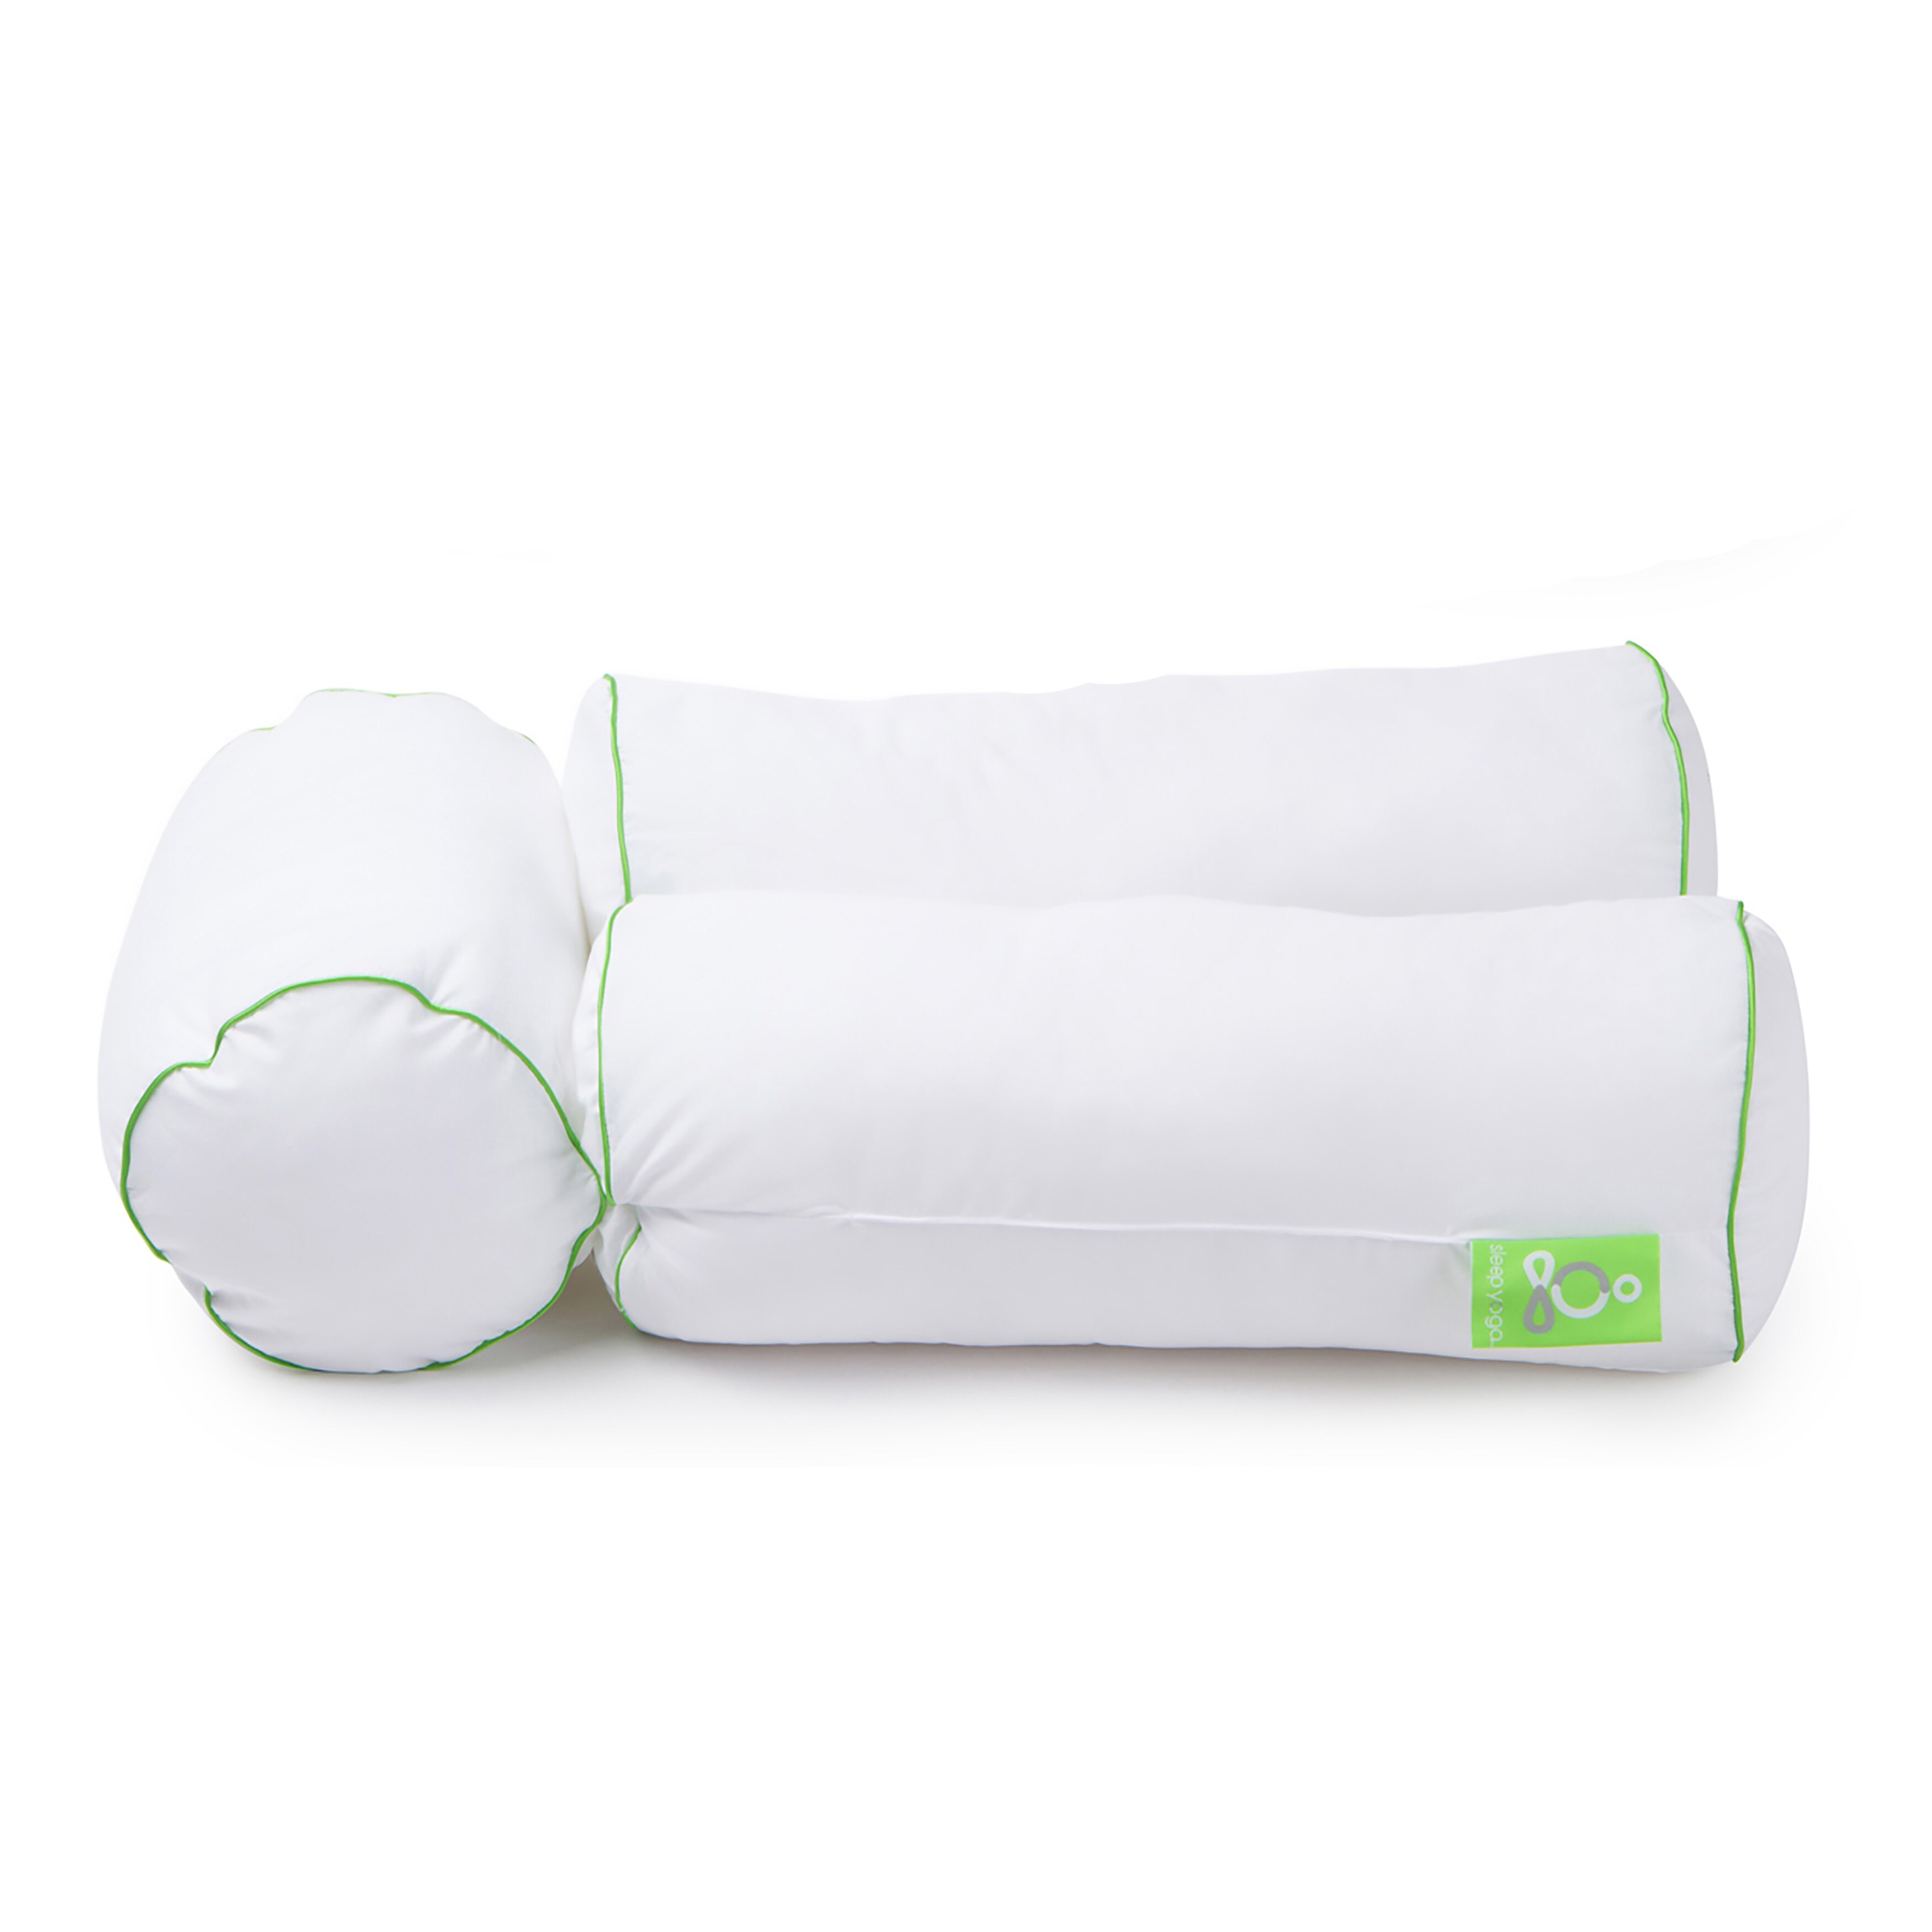 https://ak1.ostkcdn.com/images/products/13224356/Sleep-Yoga-Multi-position-Body-Pillow-and-Set-of-2-Silver-Pillow-Covers-dd145ae6-ba45-4f95-a280-11bcfa66bd7f.jpg